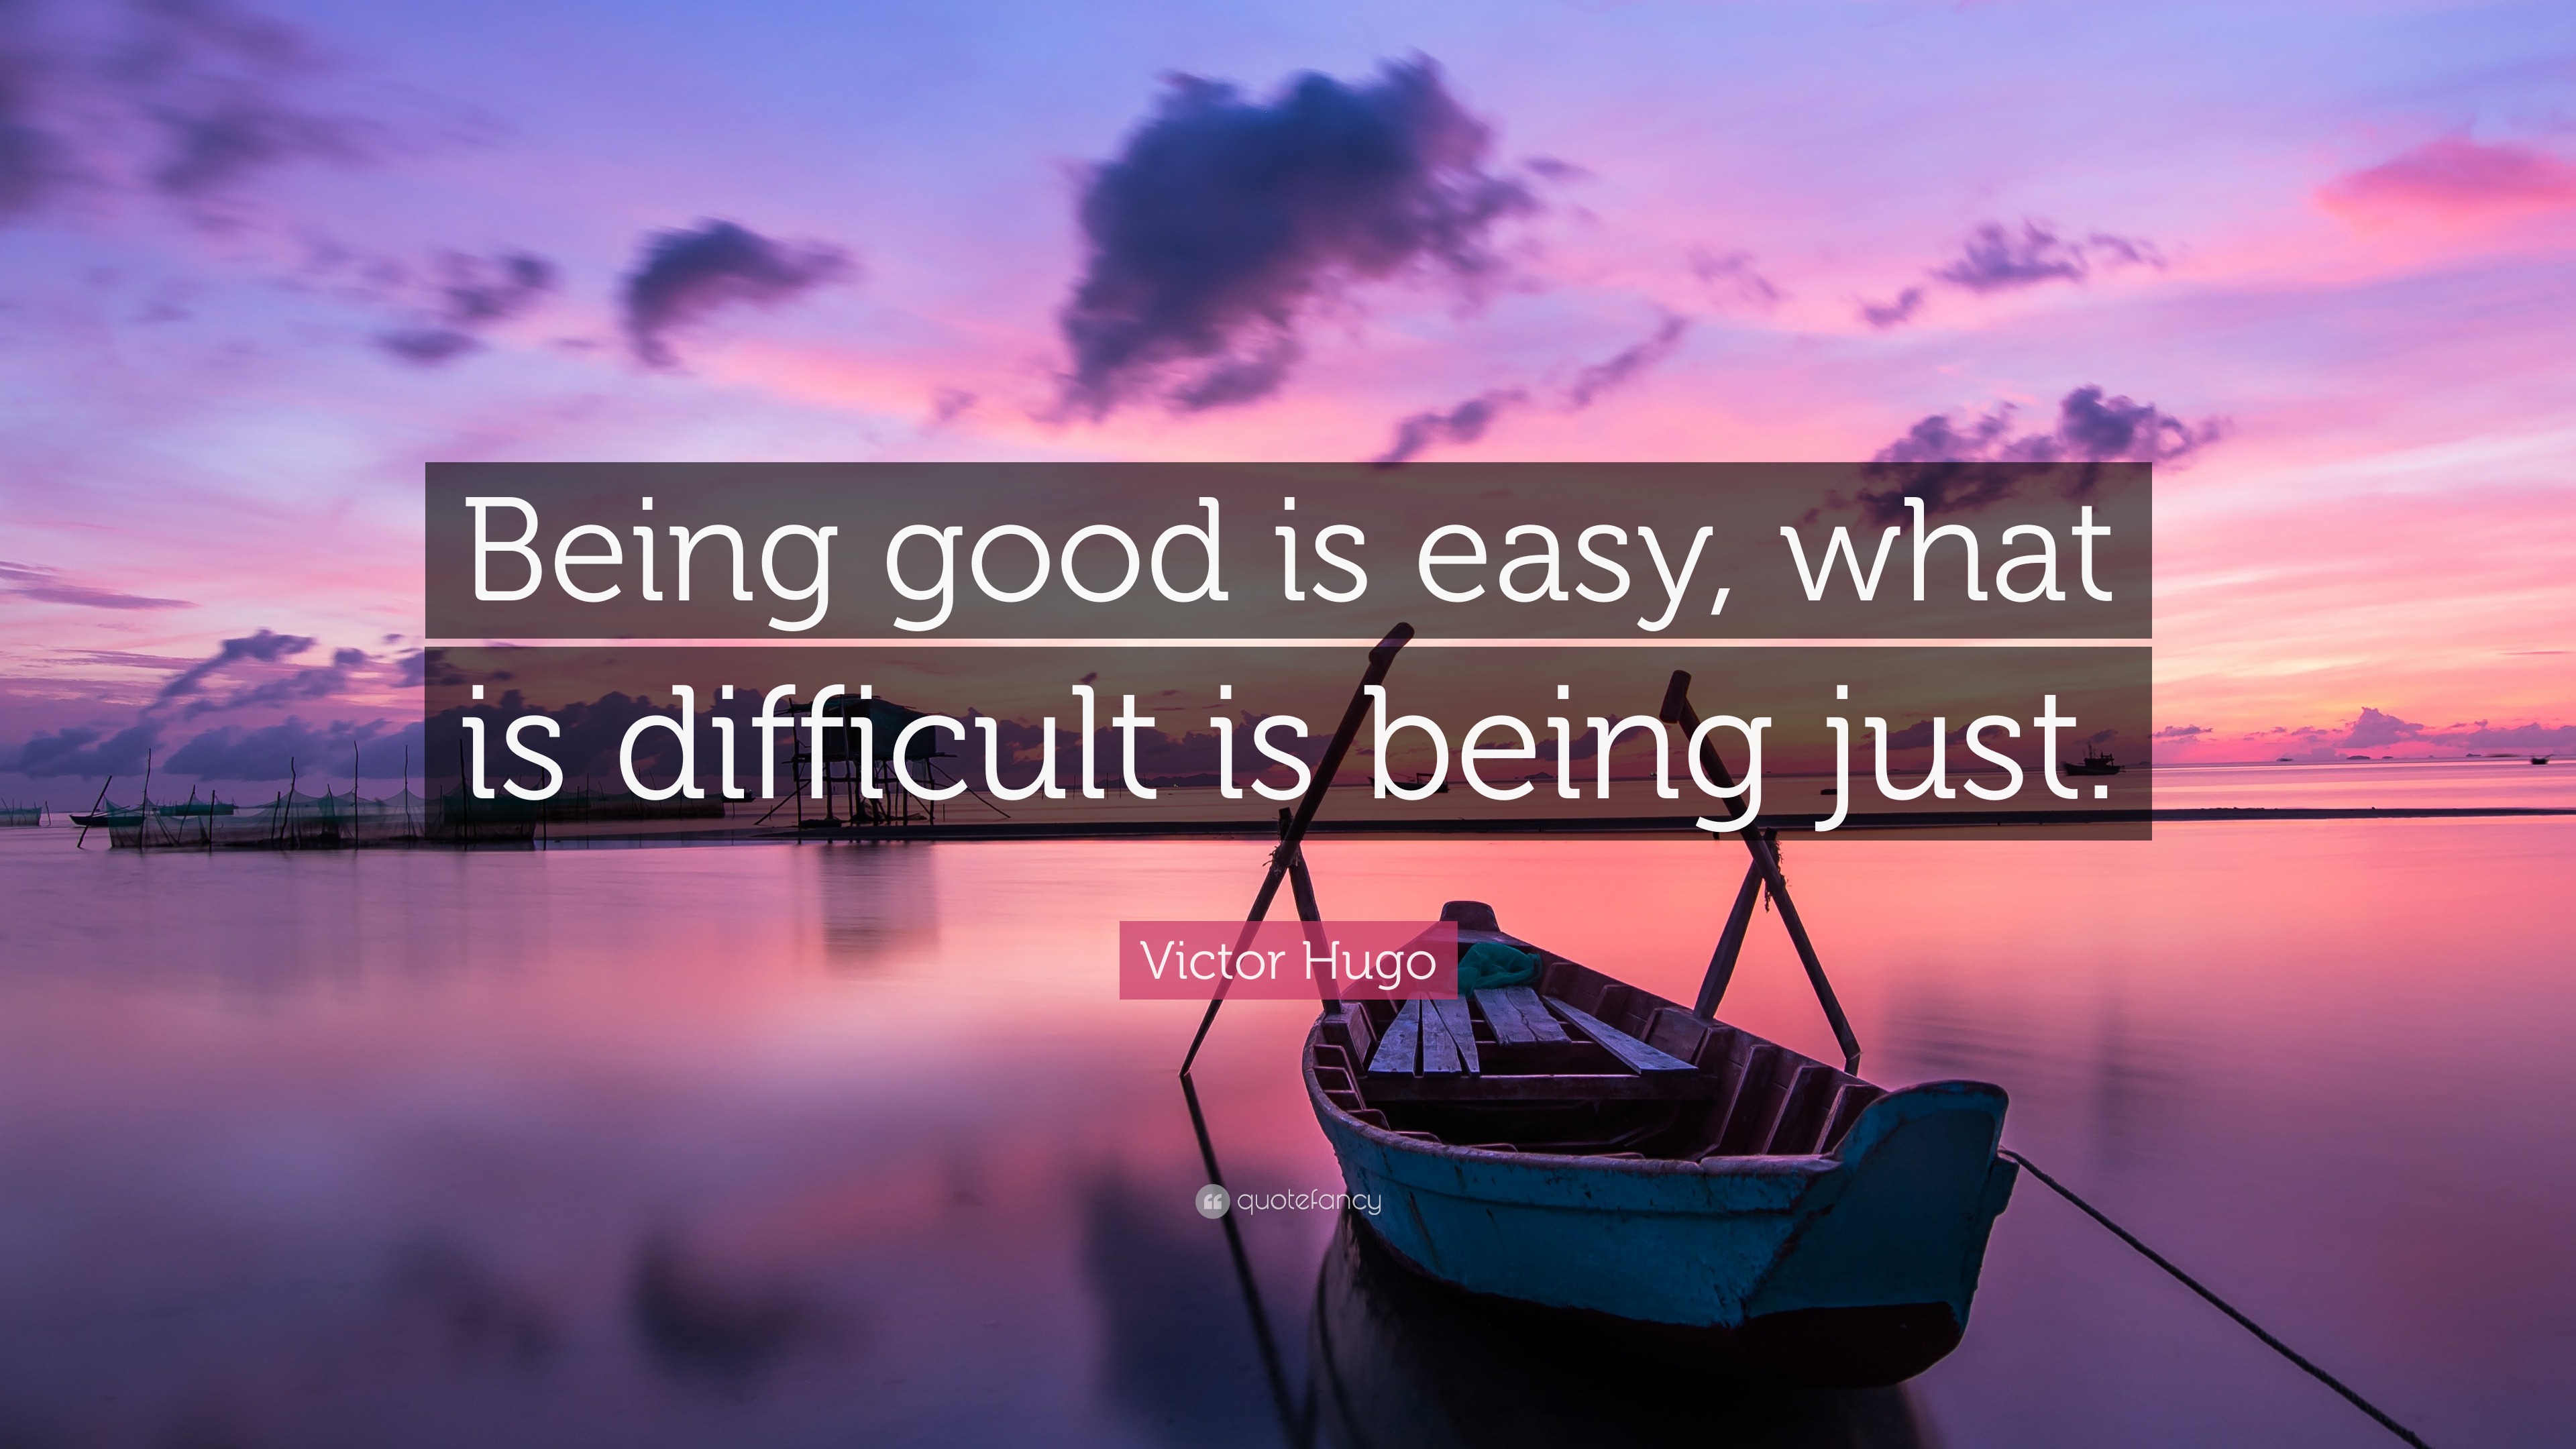 Victor Hugo Quote: “Being good is easy, what is difficult is being just